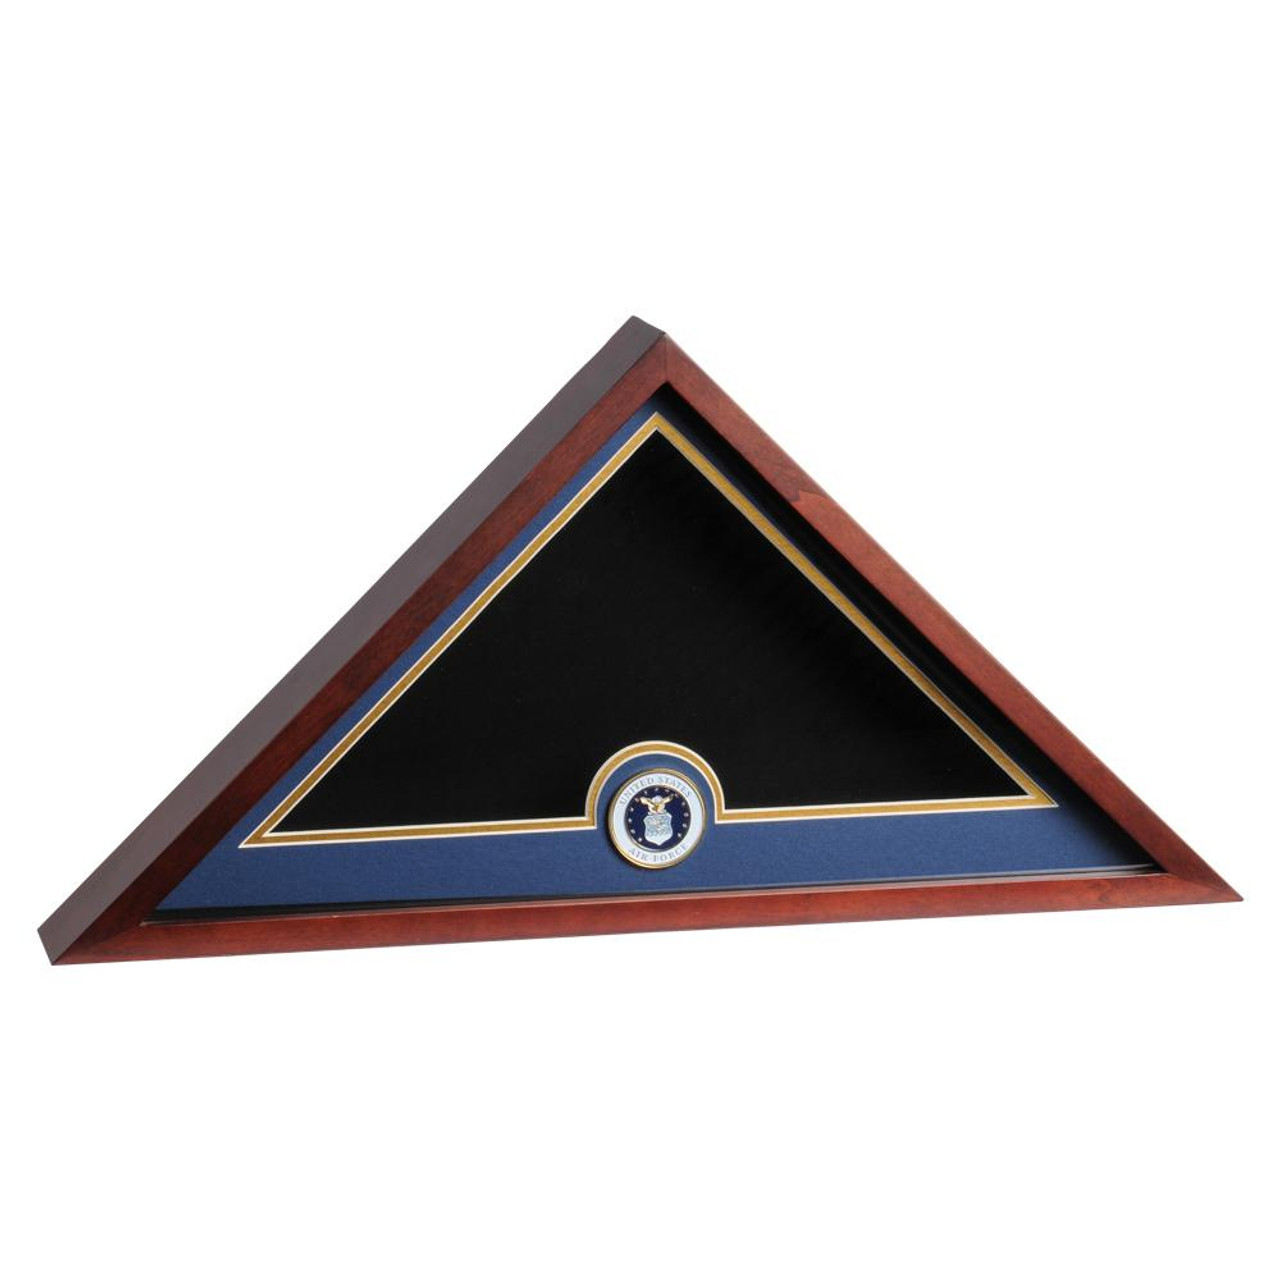 Mahogany Flag Display Case with Air Force Service Medallion for 5' x 9.5' Internment Flag